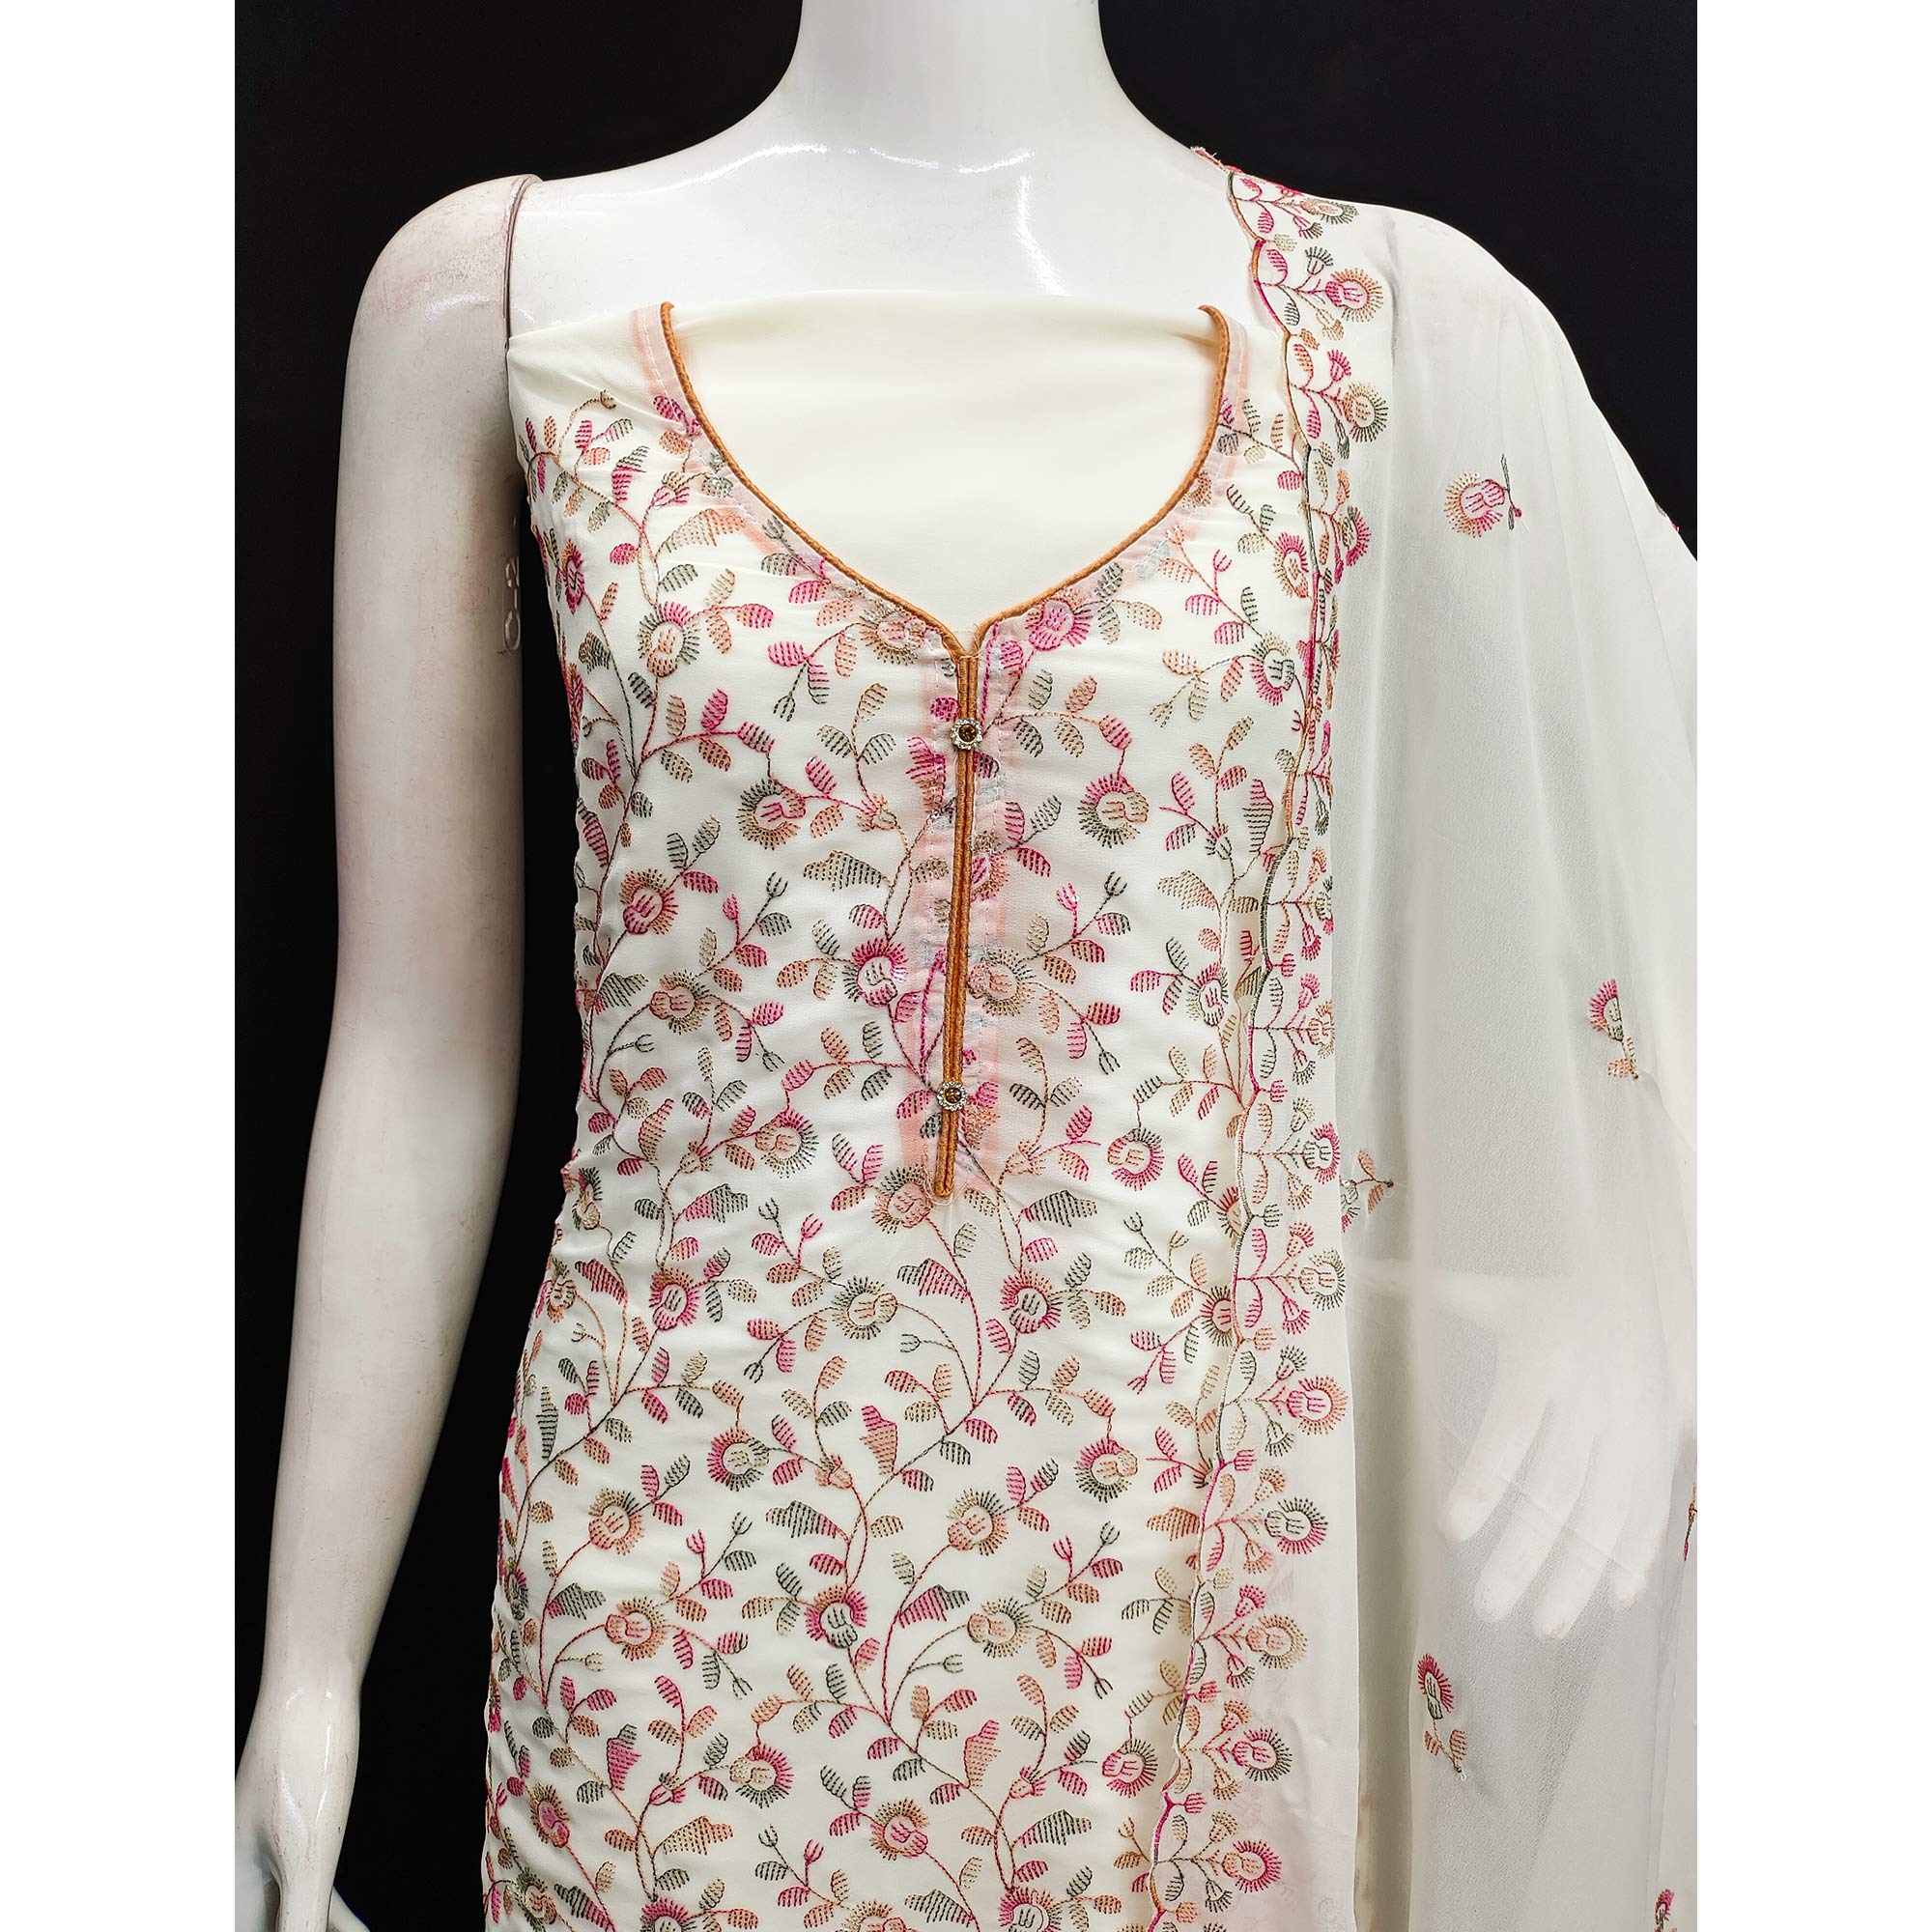 Off White Floral Embroidered Georgette Dress Material